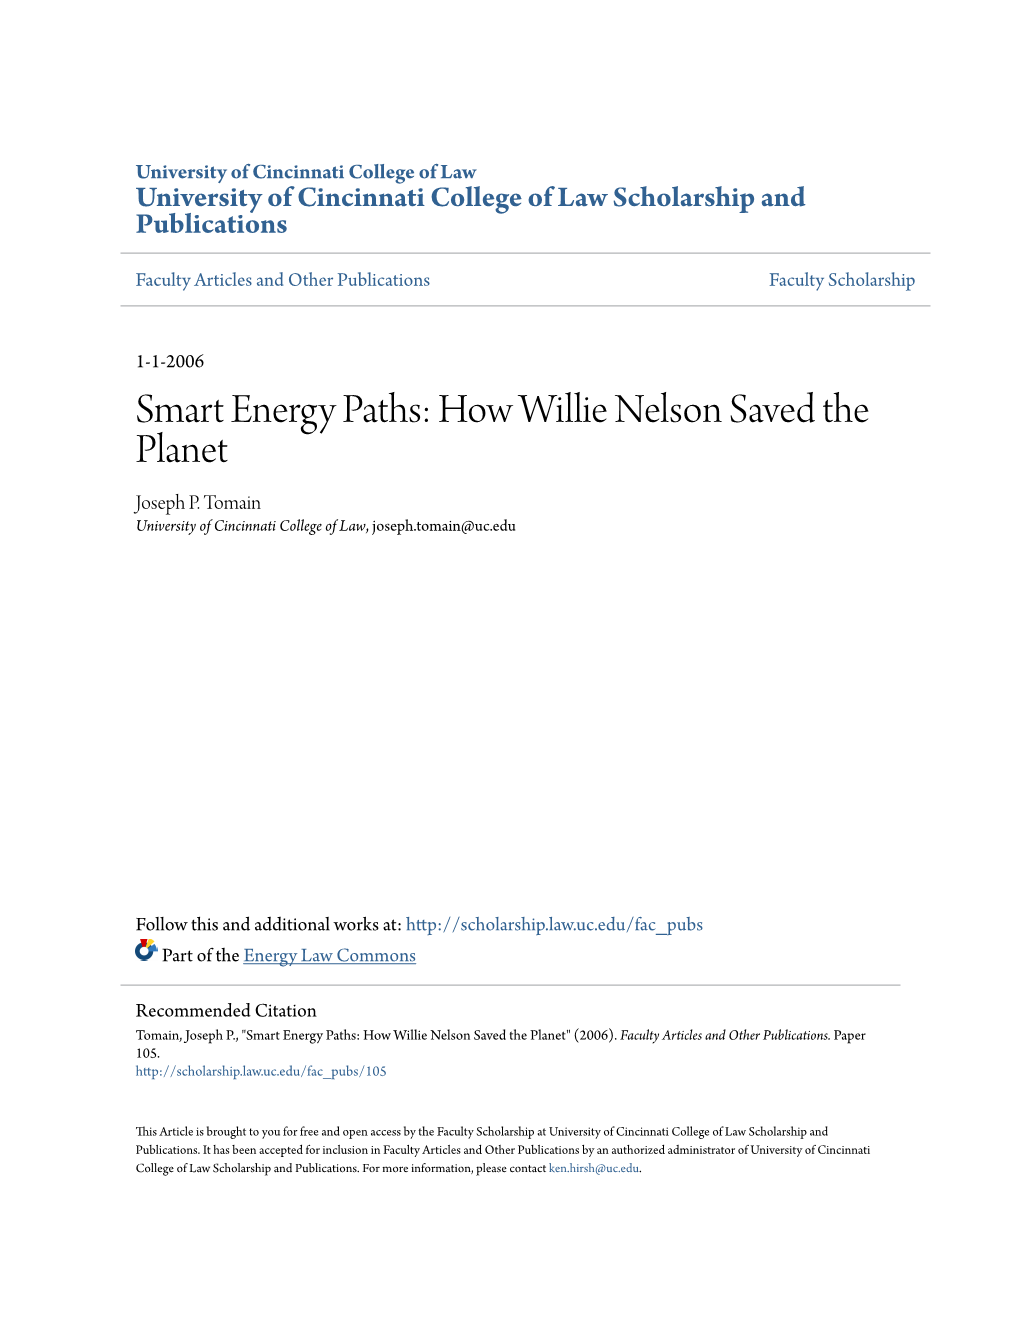 Smart Energy Paths: How Willie Nelson Saved the Planet Joseph P